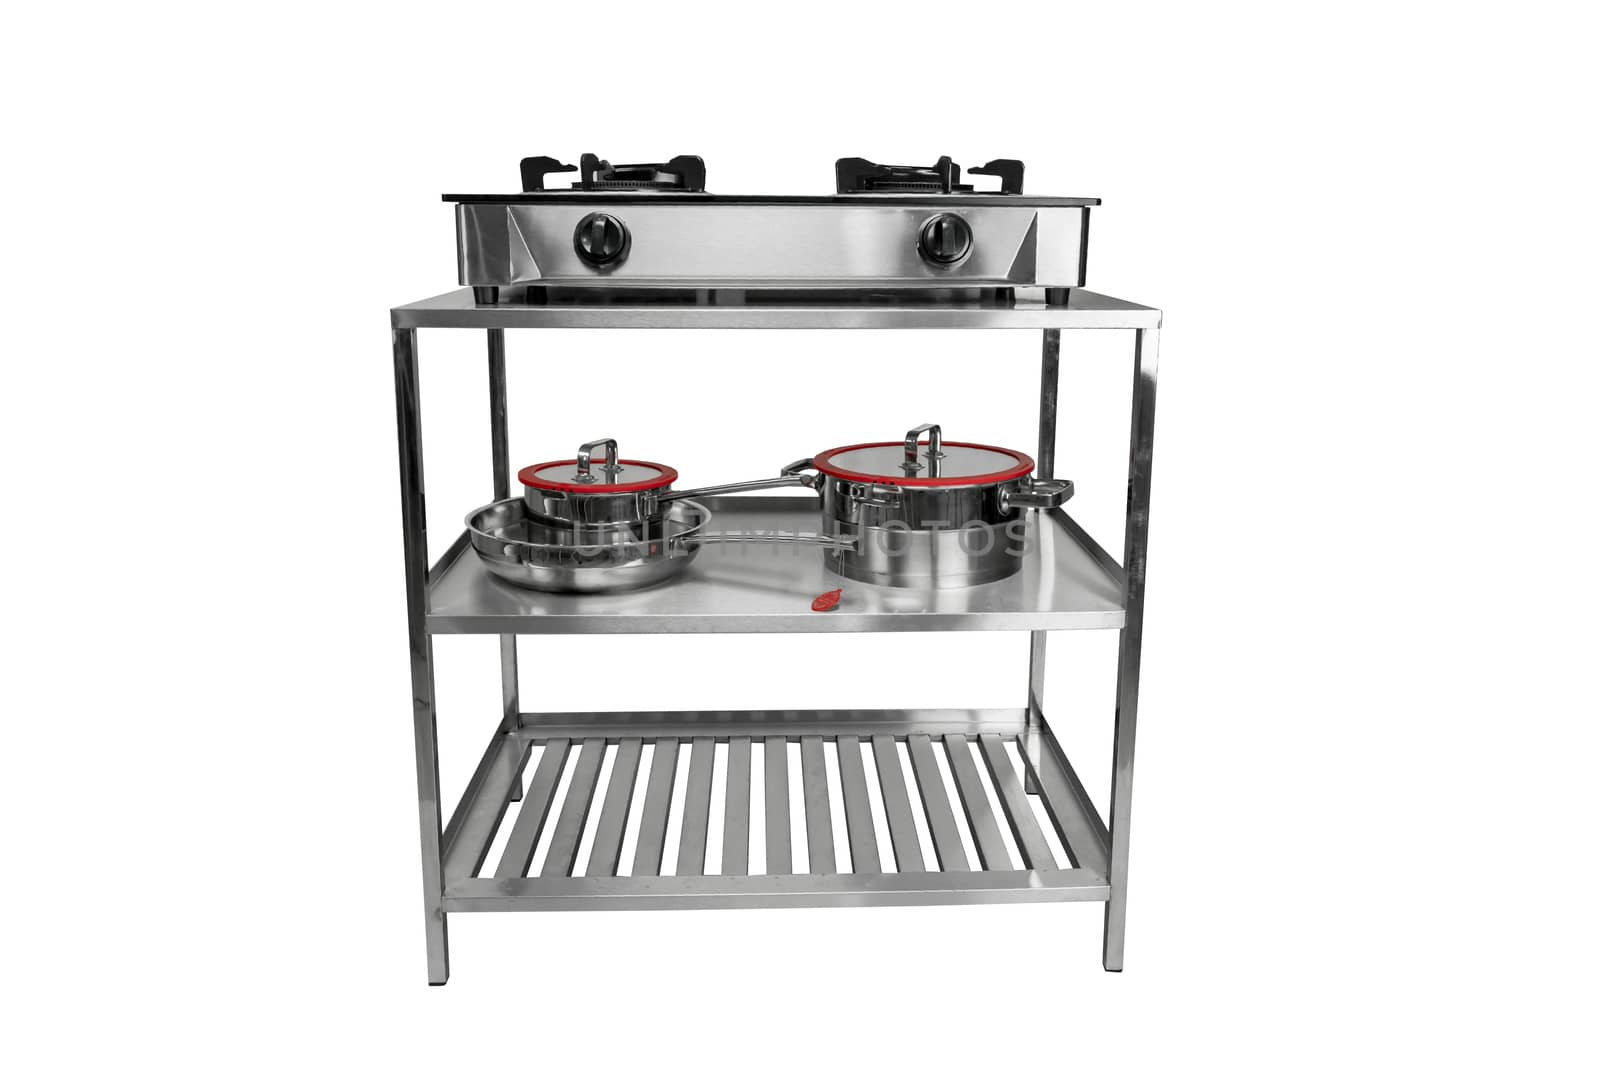 Blurred Gas stove on table of stainless on isolated white backgr by Buttus_casso